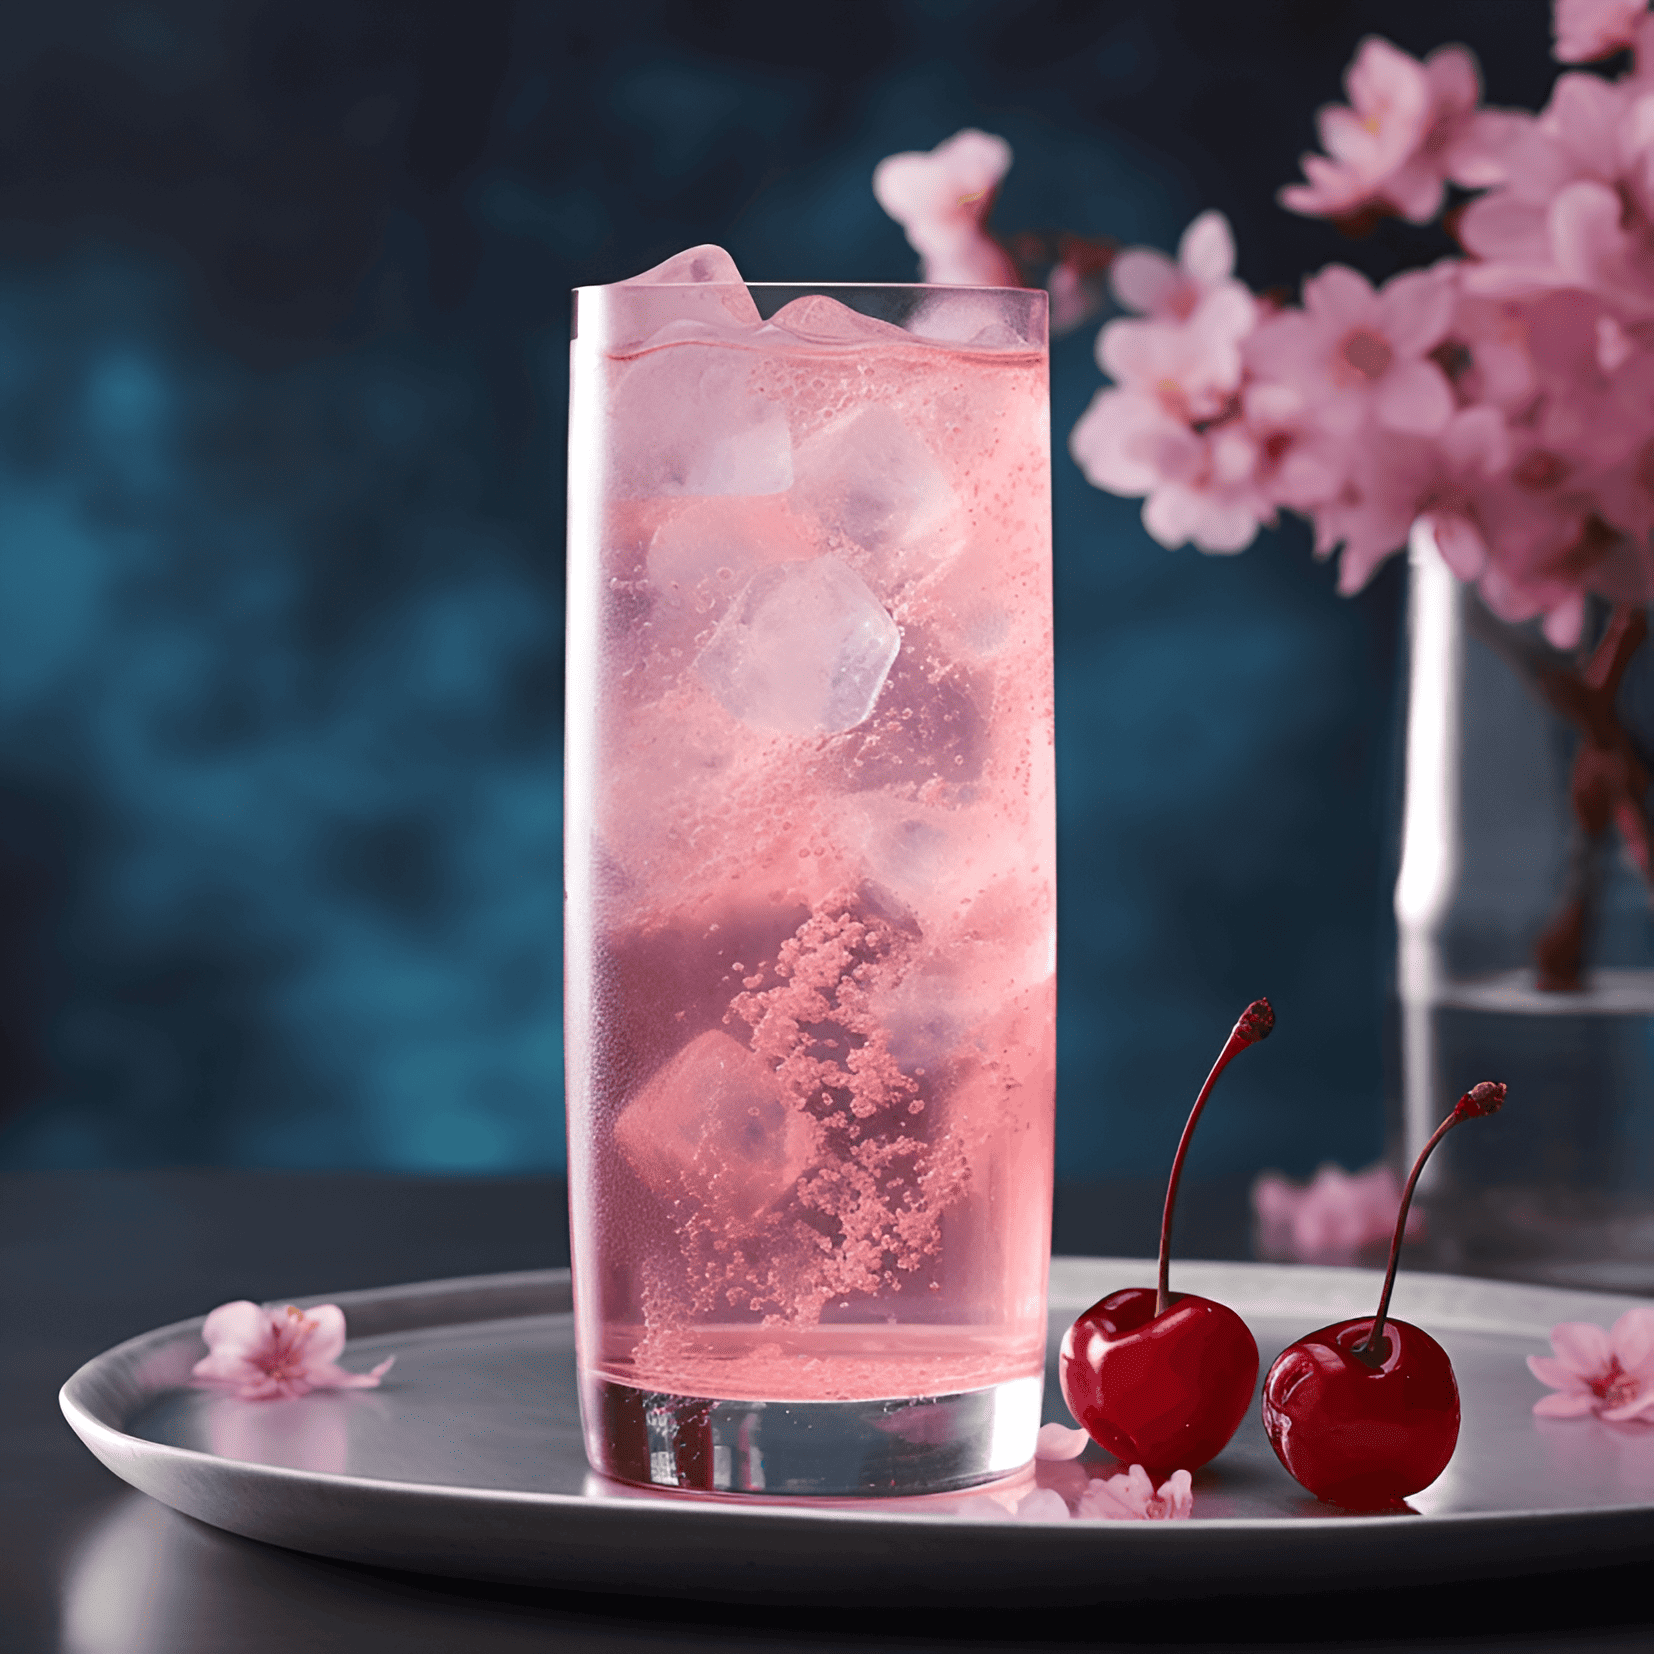 The Cherry Blossom cocktail has a delicate, fruity, and floral taste. It is slightly sweet, with a hint of tartness from the cherry and citrus flavors. The floral notes from the elderflower liqueur add a touch of sophistication, while the gin provides a subtle, refreshing kick.